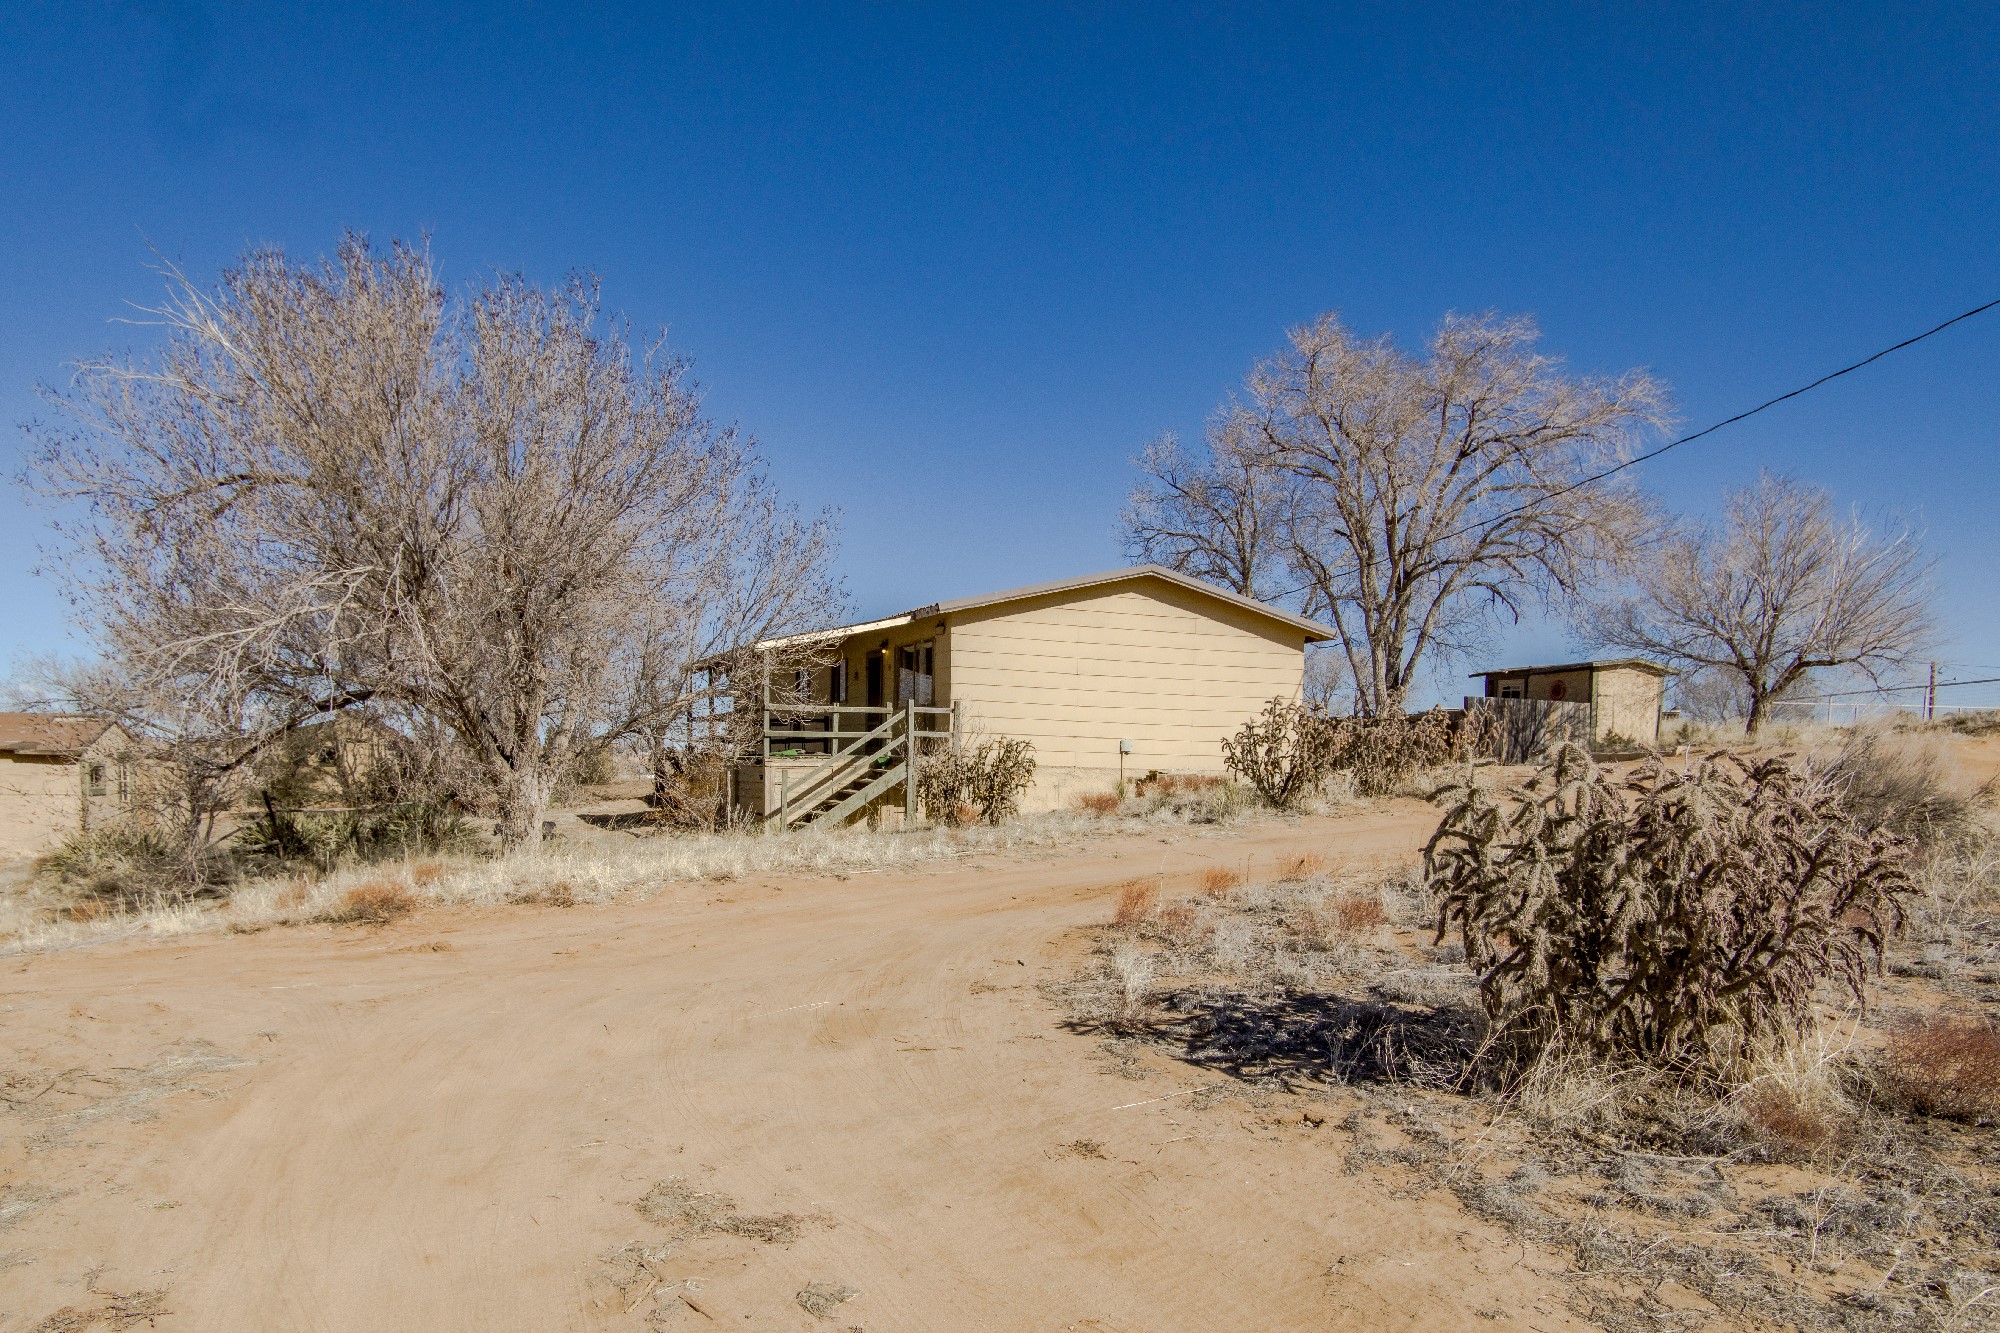 55 W Nambe, Santa Fe, New Mexico 87508, 4 Bedrooms Bedrooms, ,2 BathroomsBathrooms,Residential,For Sale,55 W Nambe,202400147